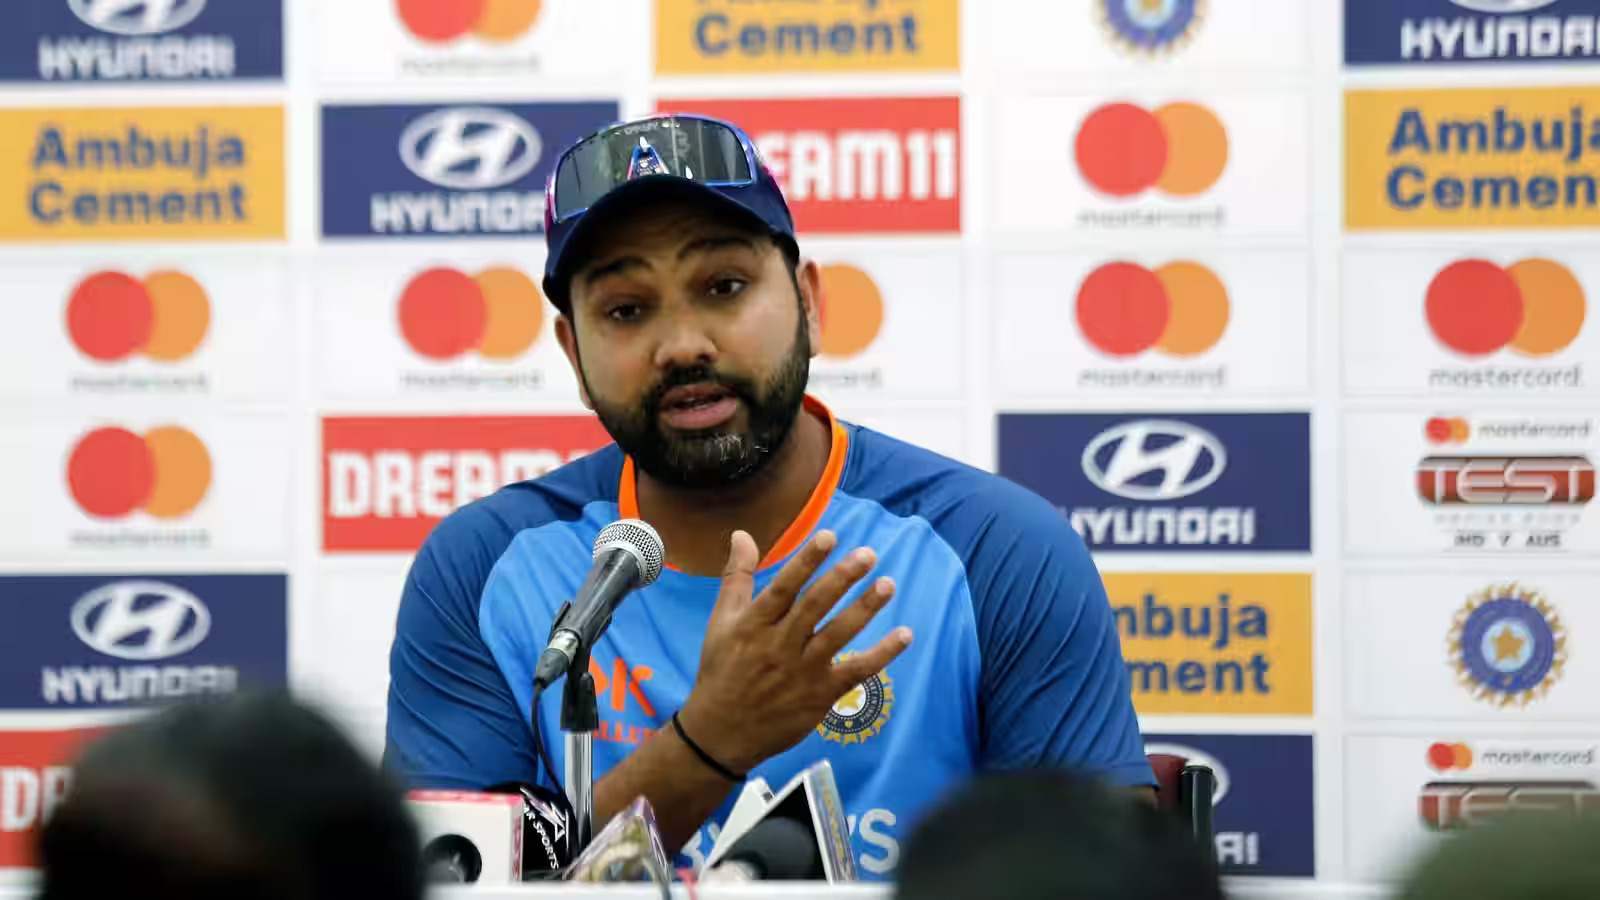 Rohit Sharma Aims to Rectify World Cup Loss with Historic Victory in Test Series as Team India Captain